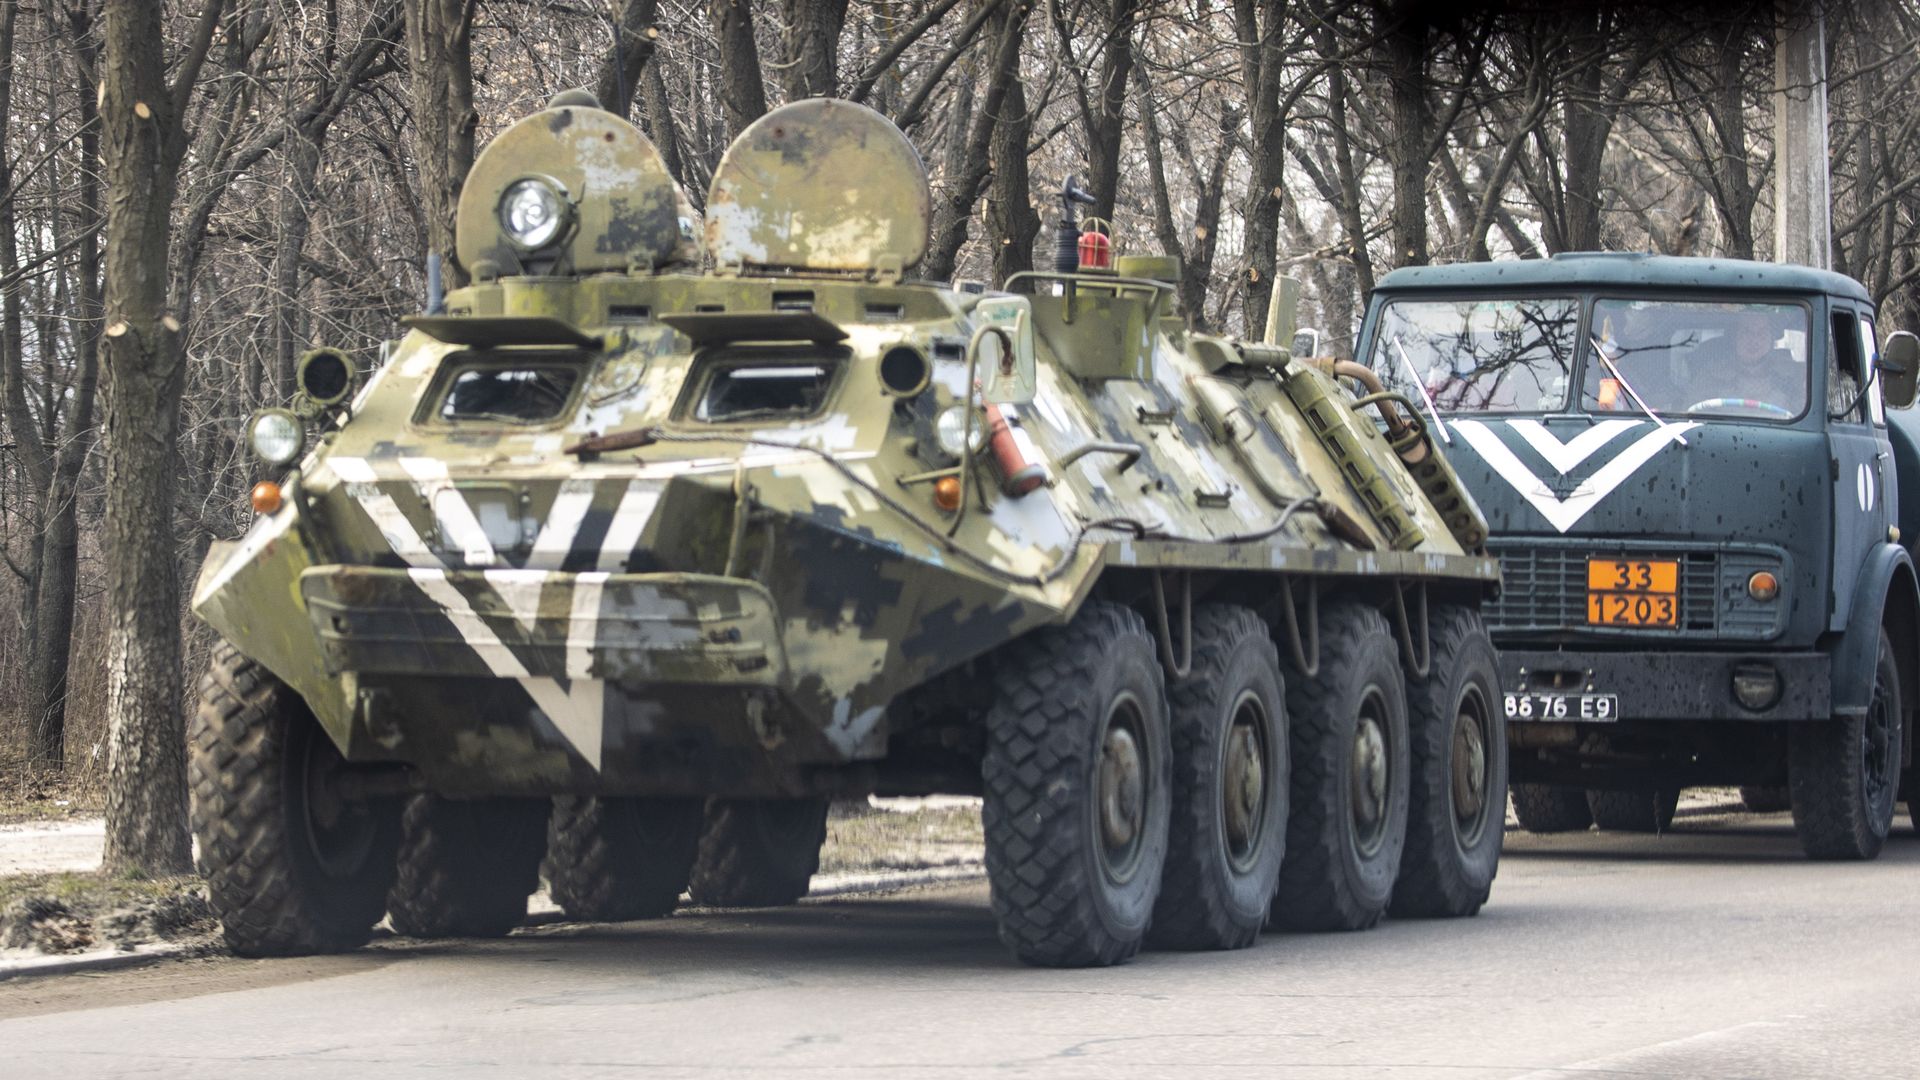 A view of military vehicles after Russia's military operation on February 24, 2022, in Kramatorsk, Ukraine.